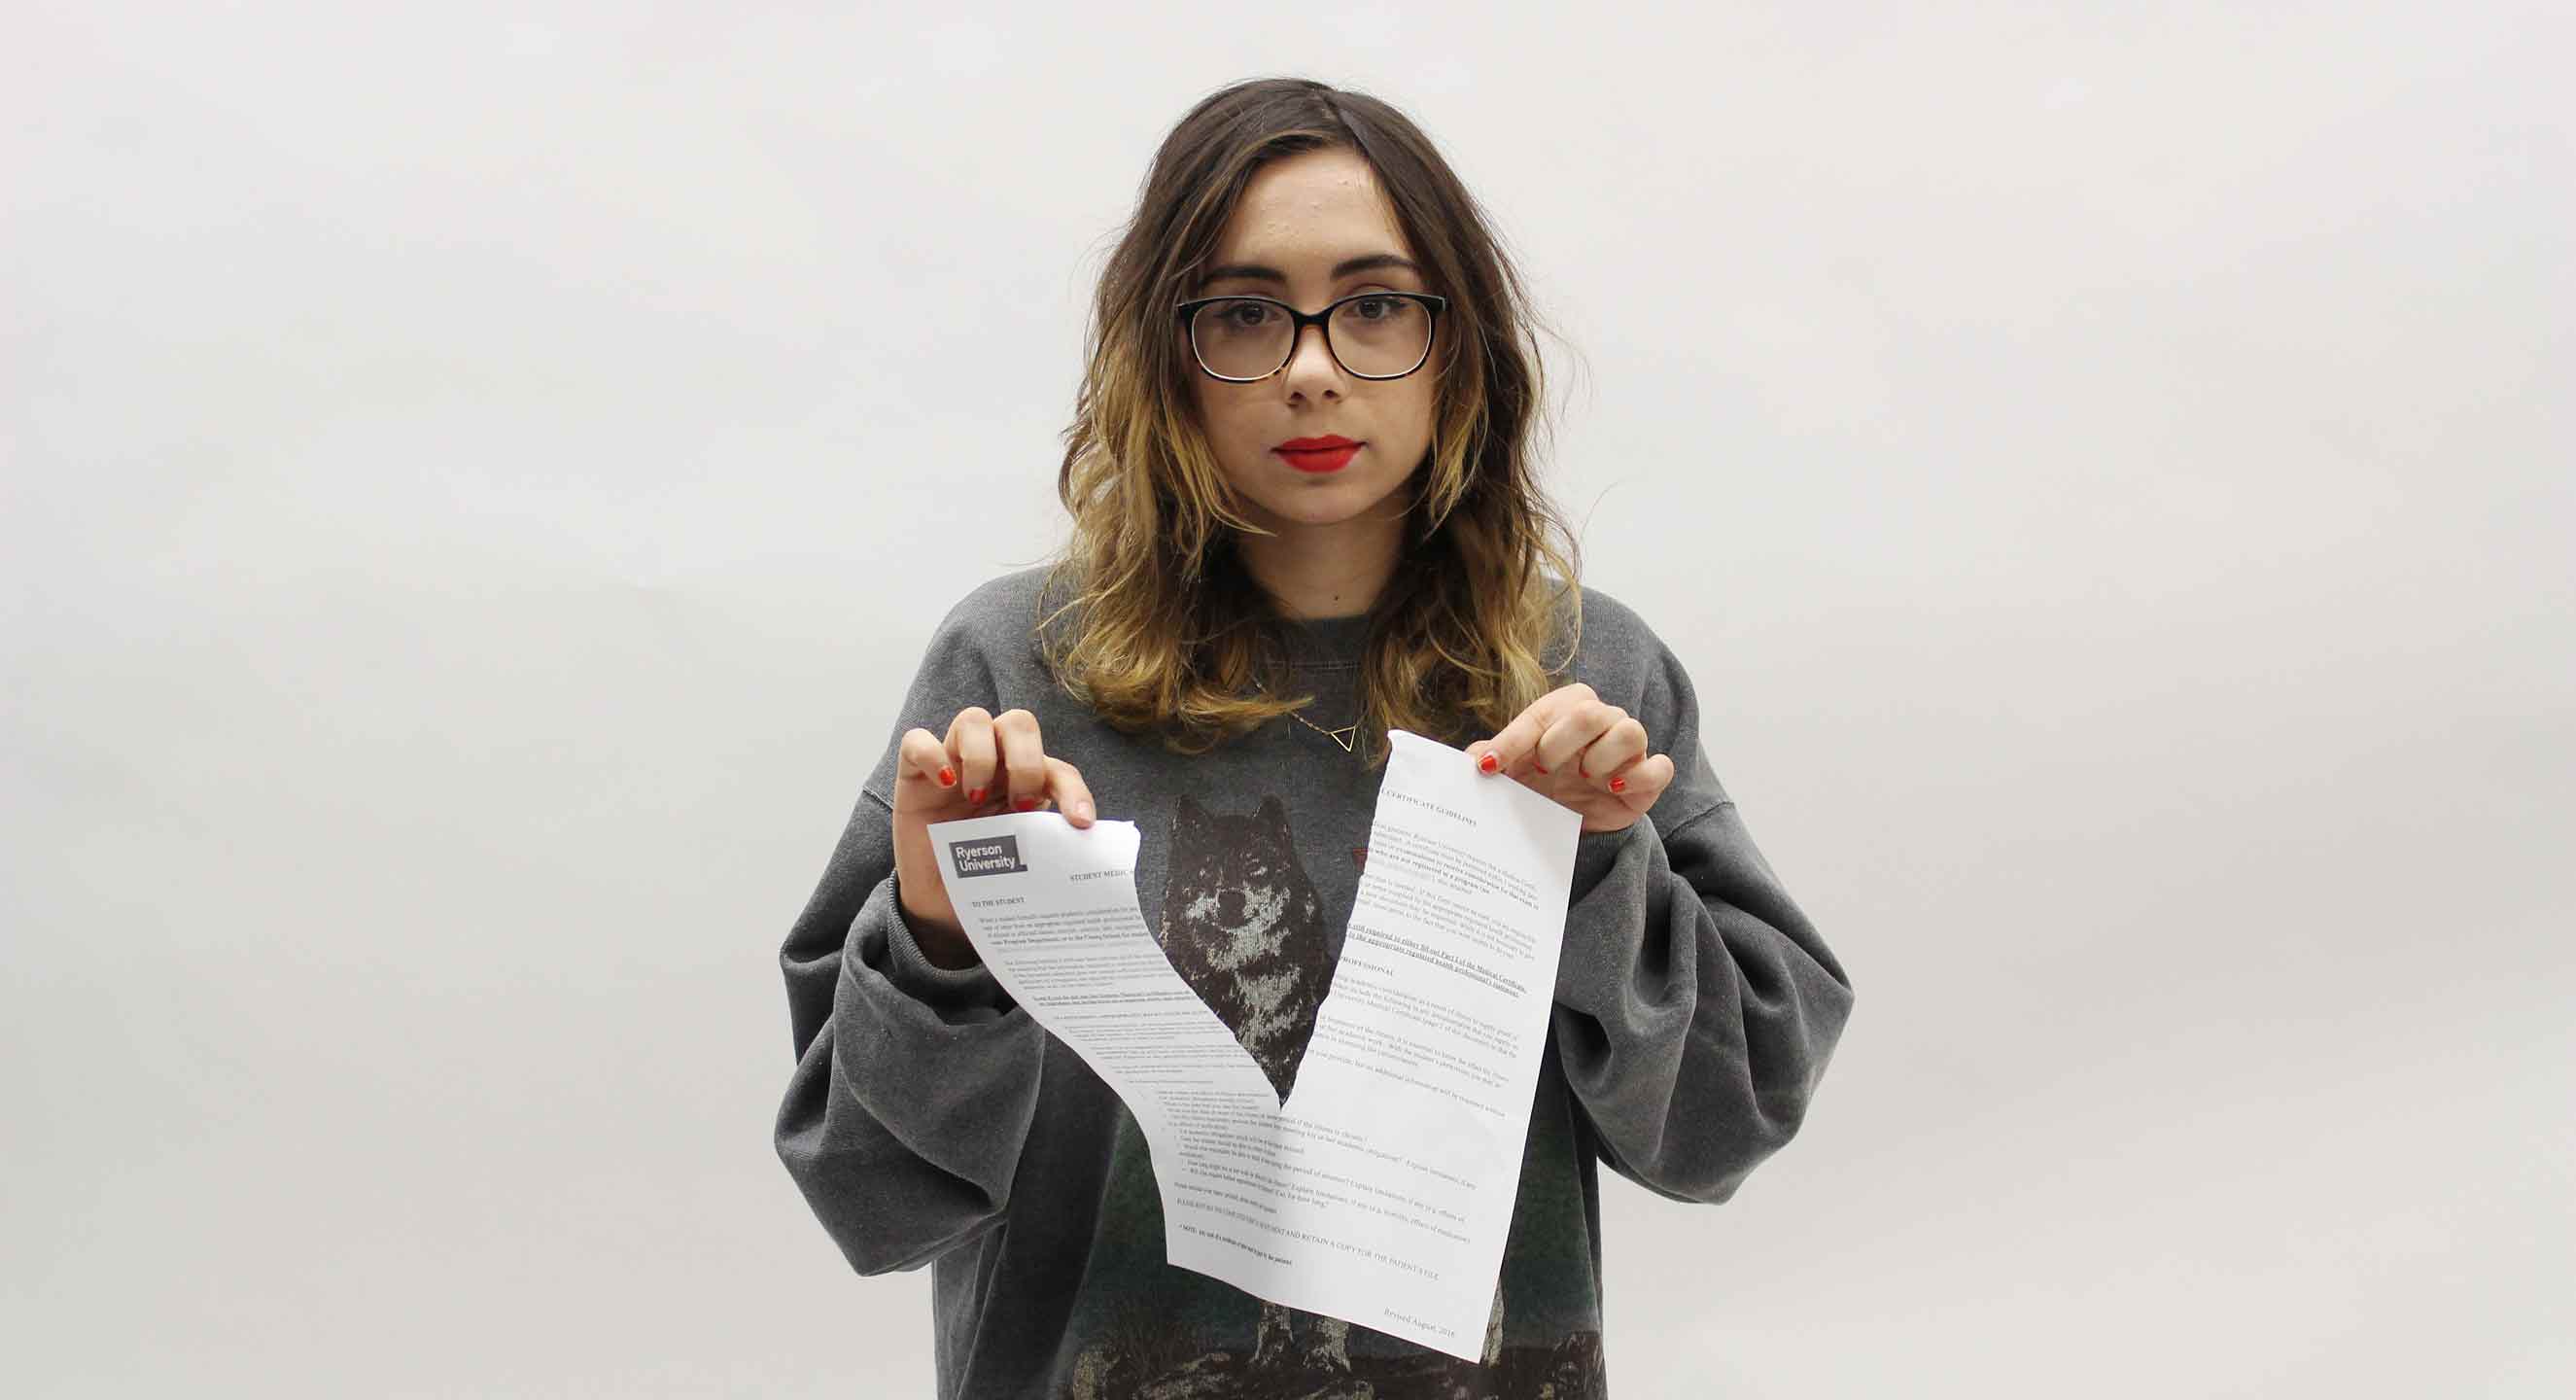 Student medical certificates aren’t as useful as Ryerson makes them out to be. PHOTO: DEVIN JONES